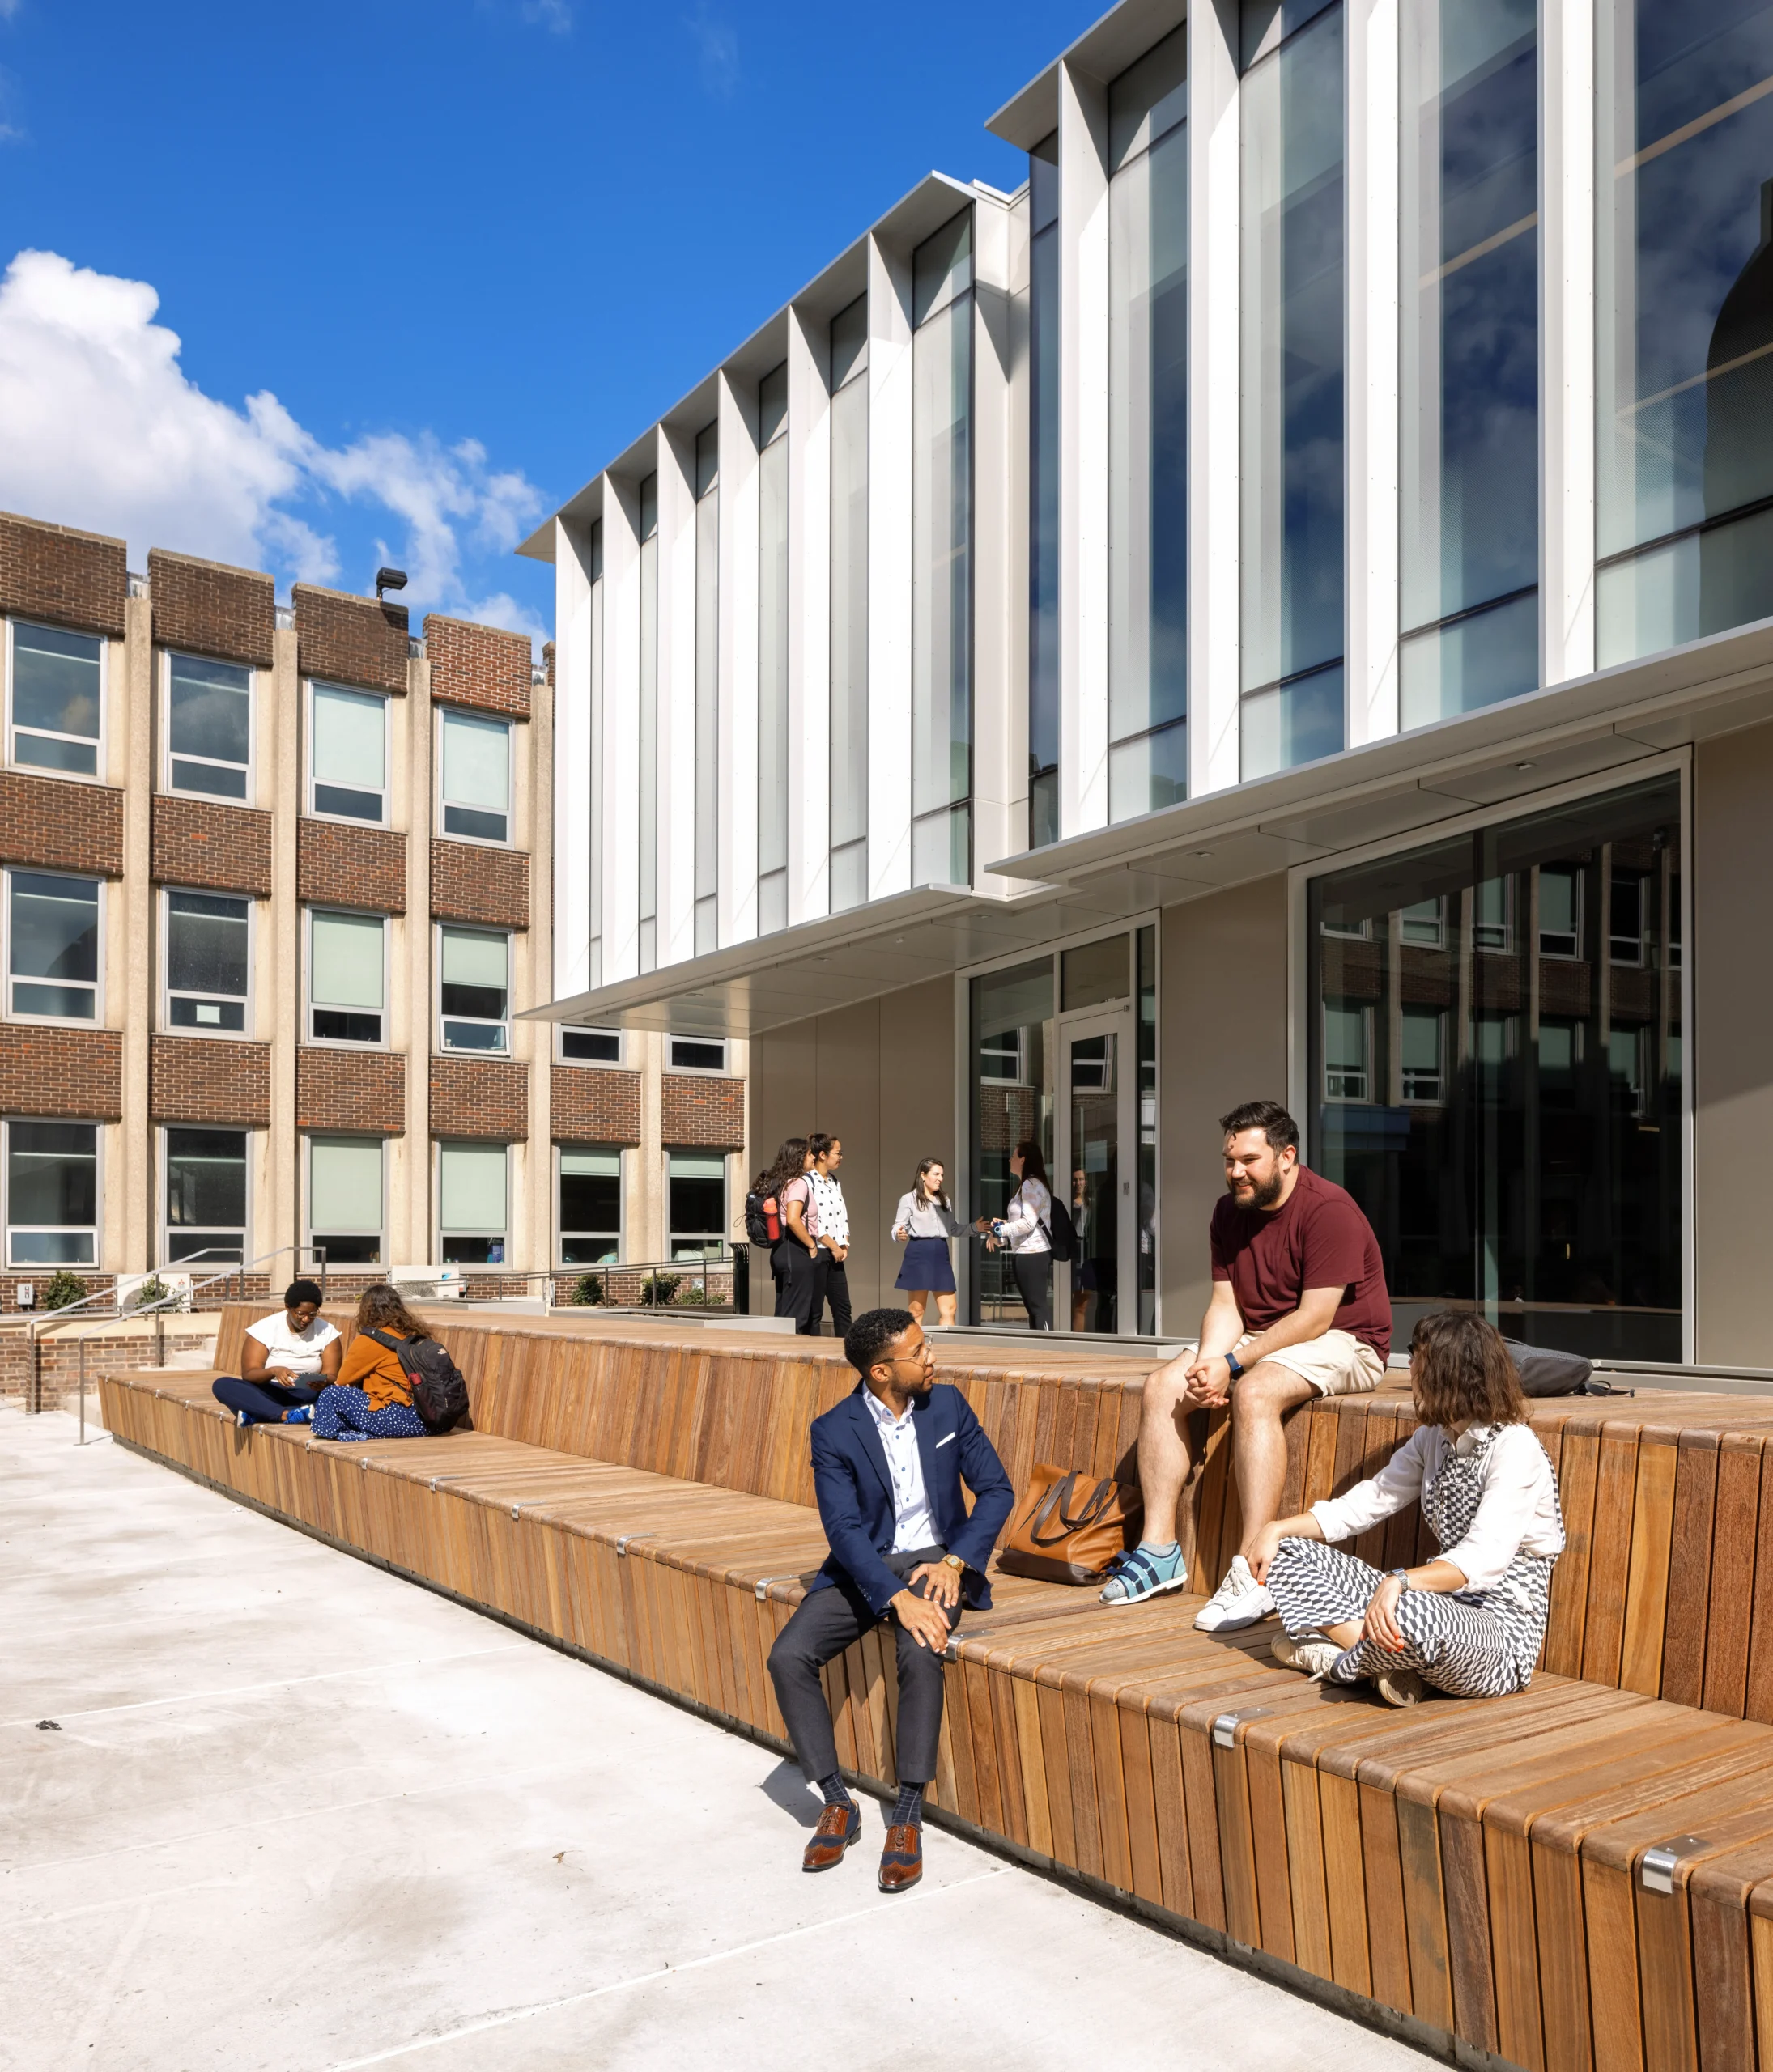 Penn GSE's brand new courtyard with modern wood seating area and students involved in conversation and socializing